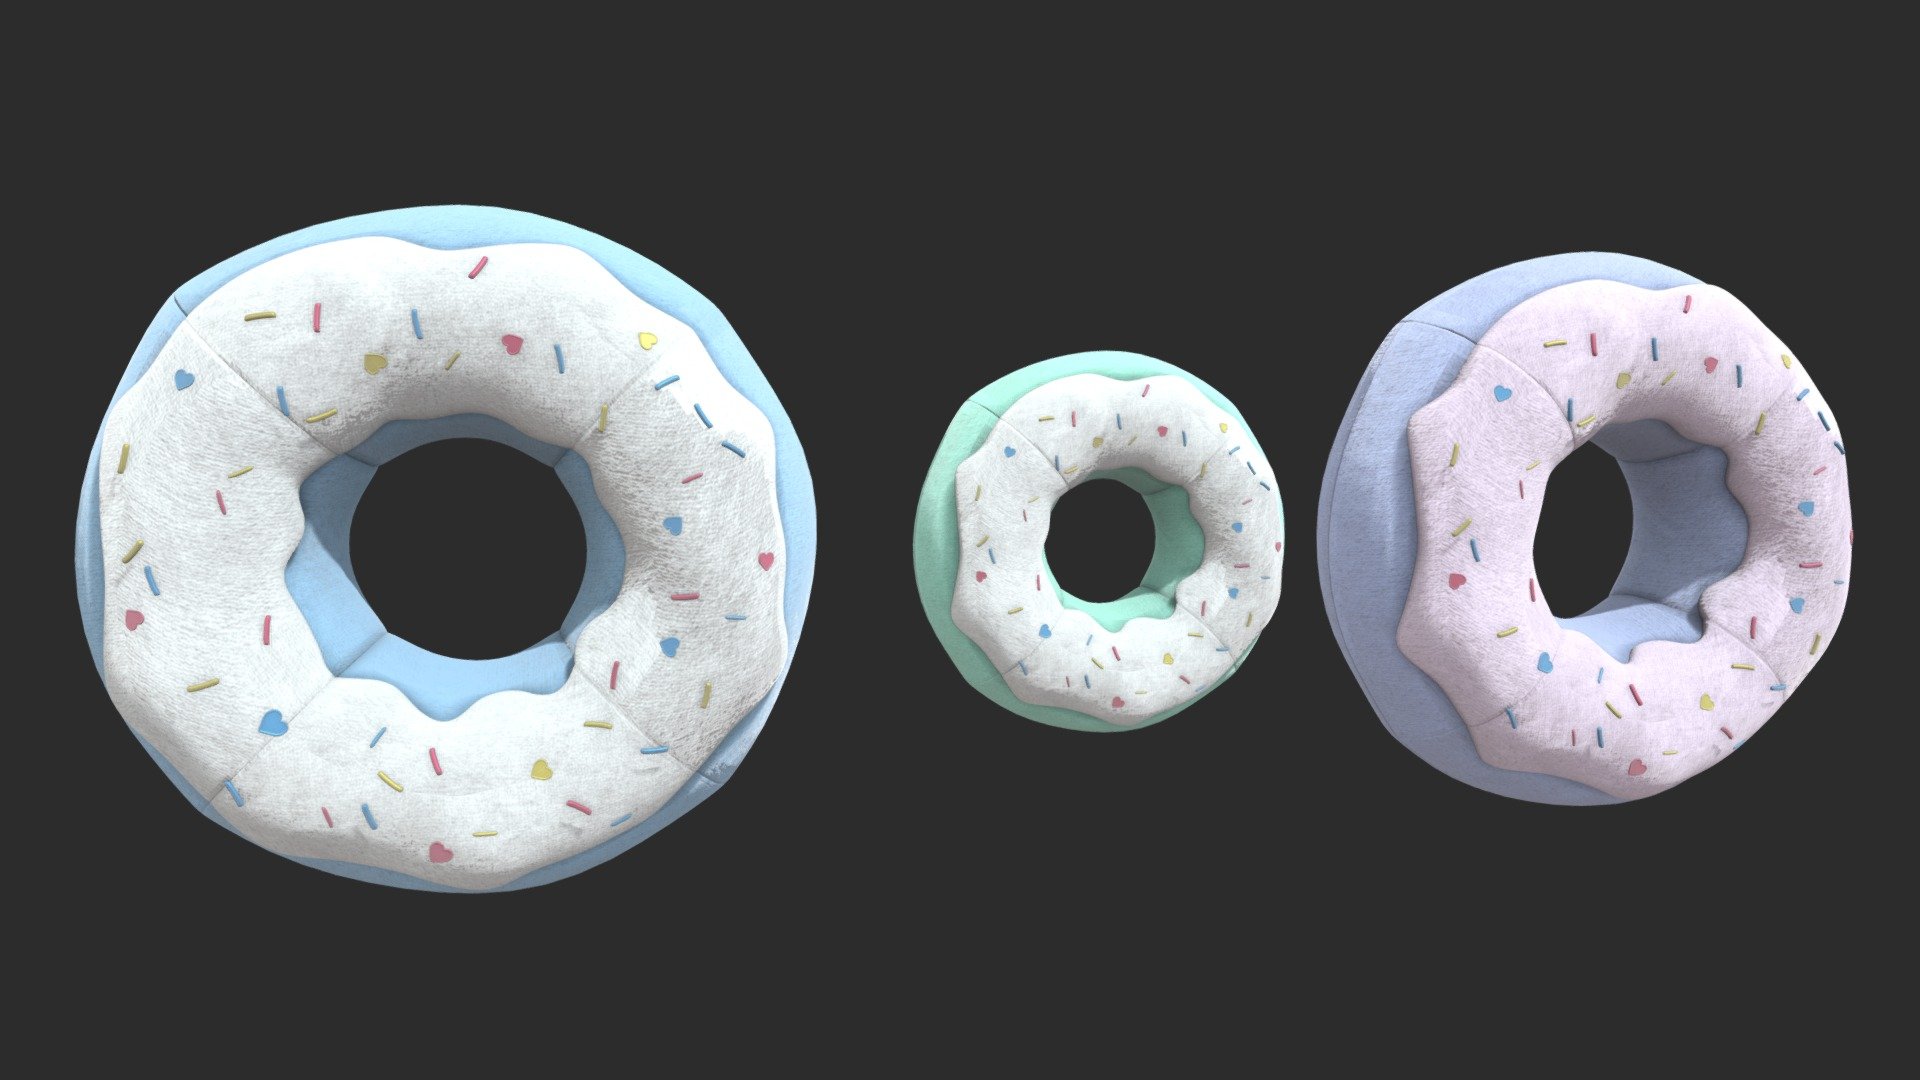 Donut like pillows in 3 color variations, two 70cm diameters and one with 40cm diameters.
(Baked 4K textures)

https://www.busypigeon.net/ - donut pillows - Download Free 3D model by busypigeon3d 3d model